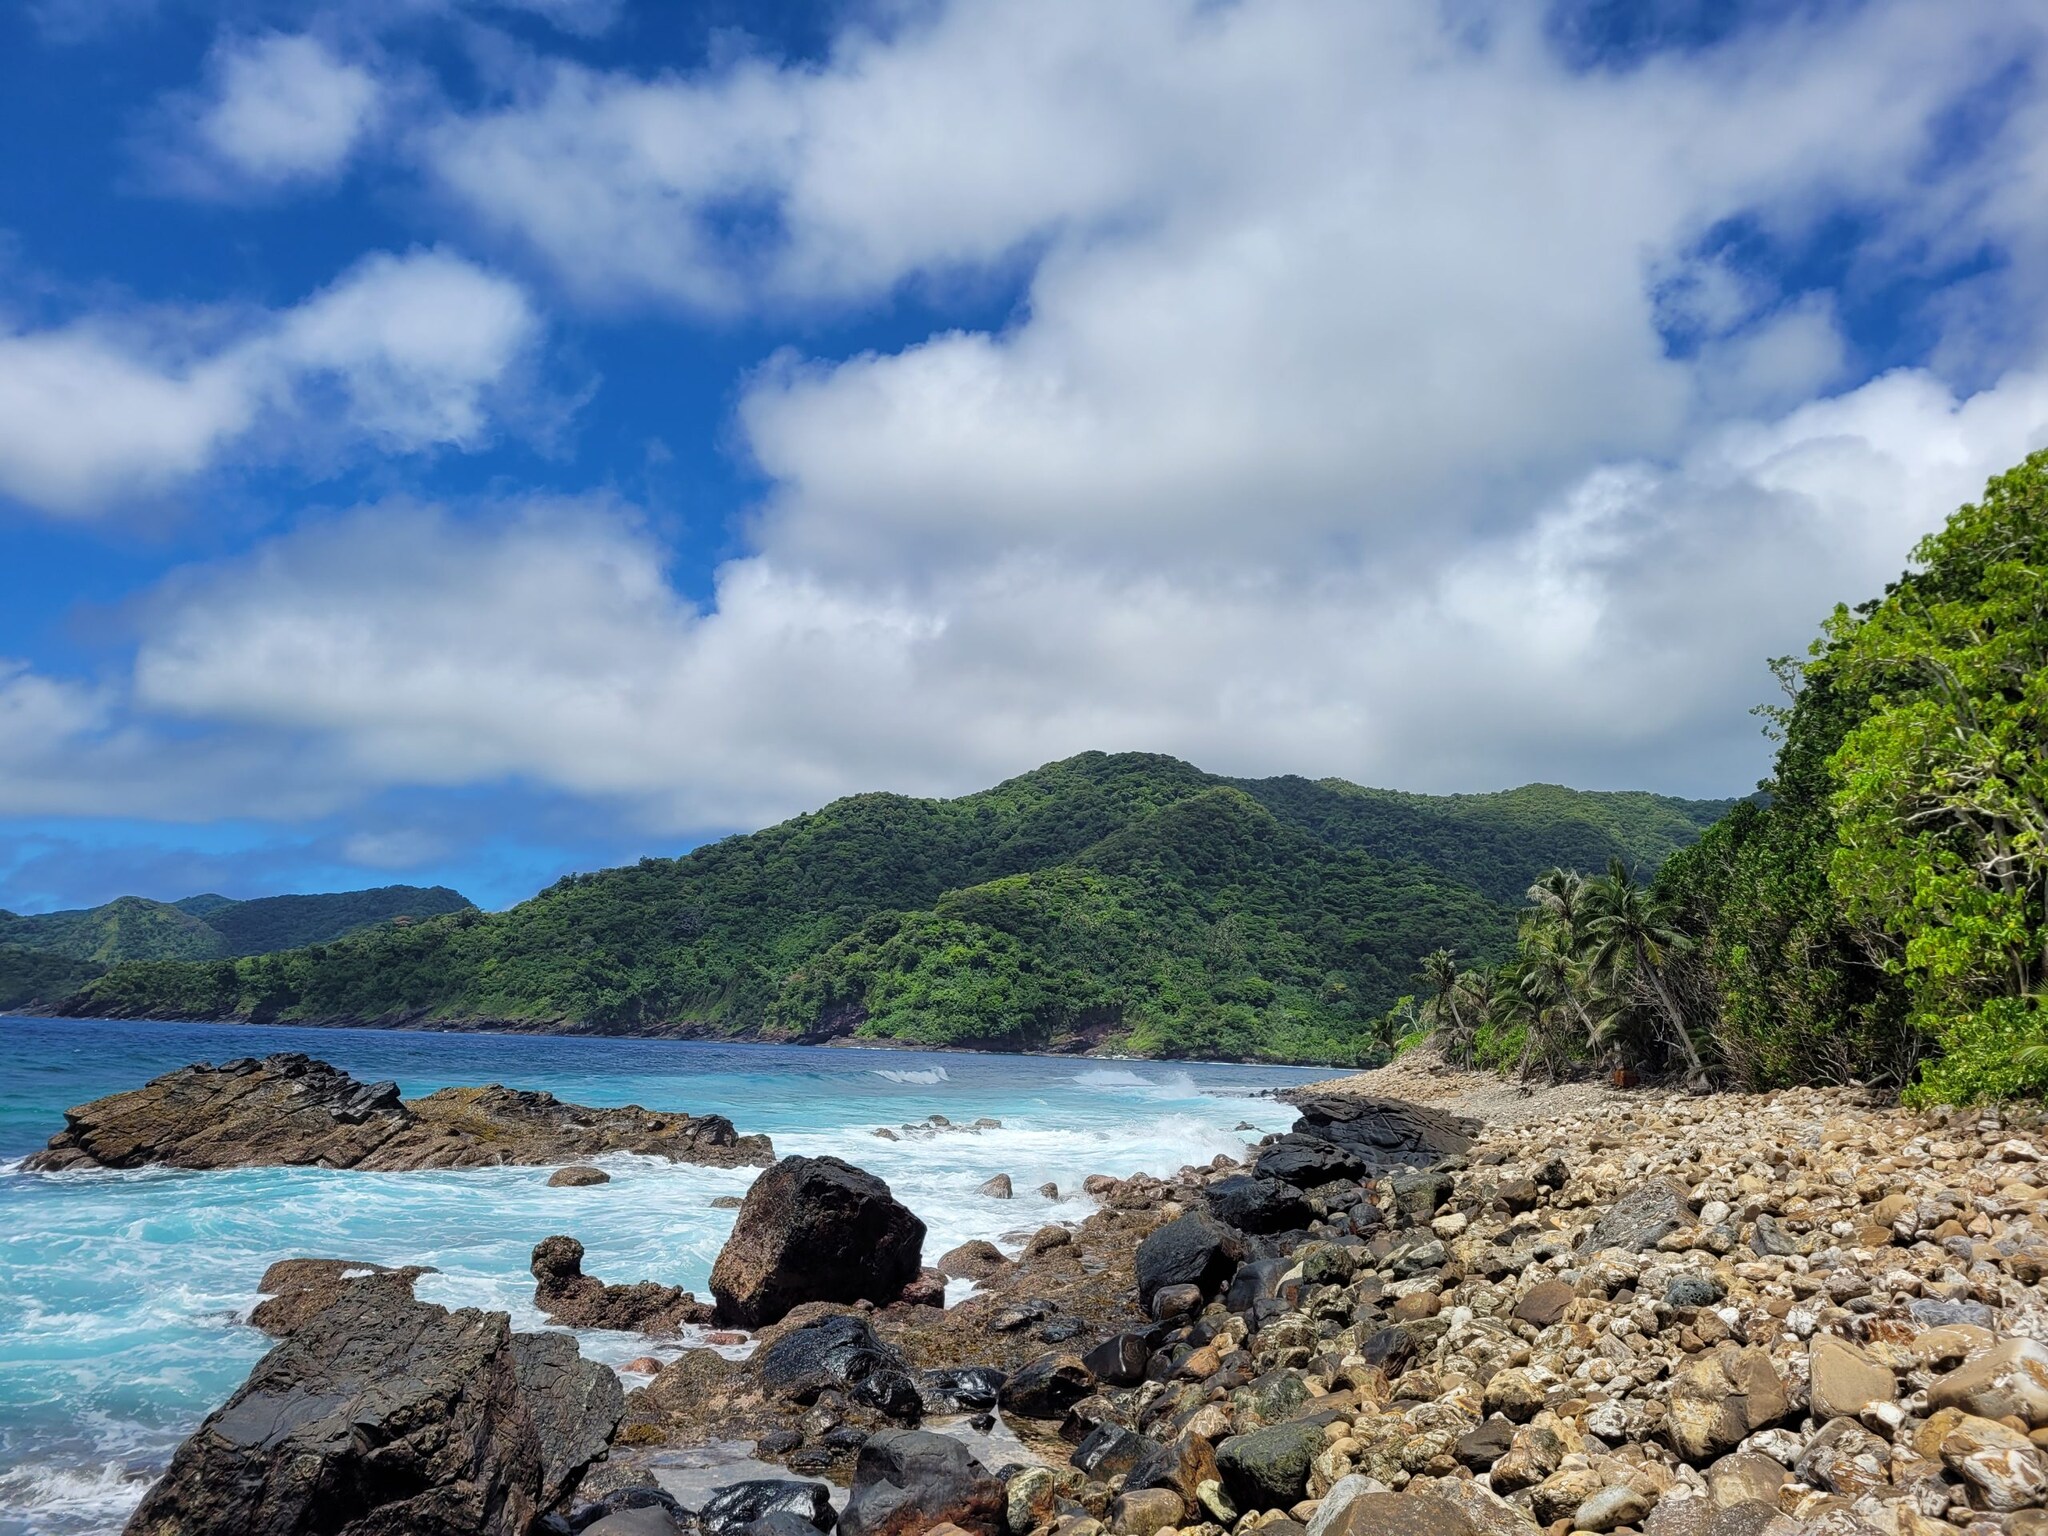 National Park of American Samoa features a rocky beach with a mountainous background.